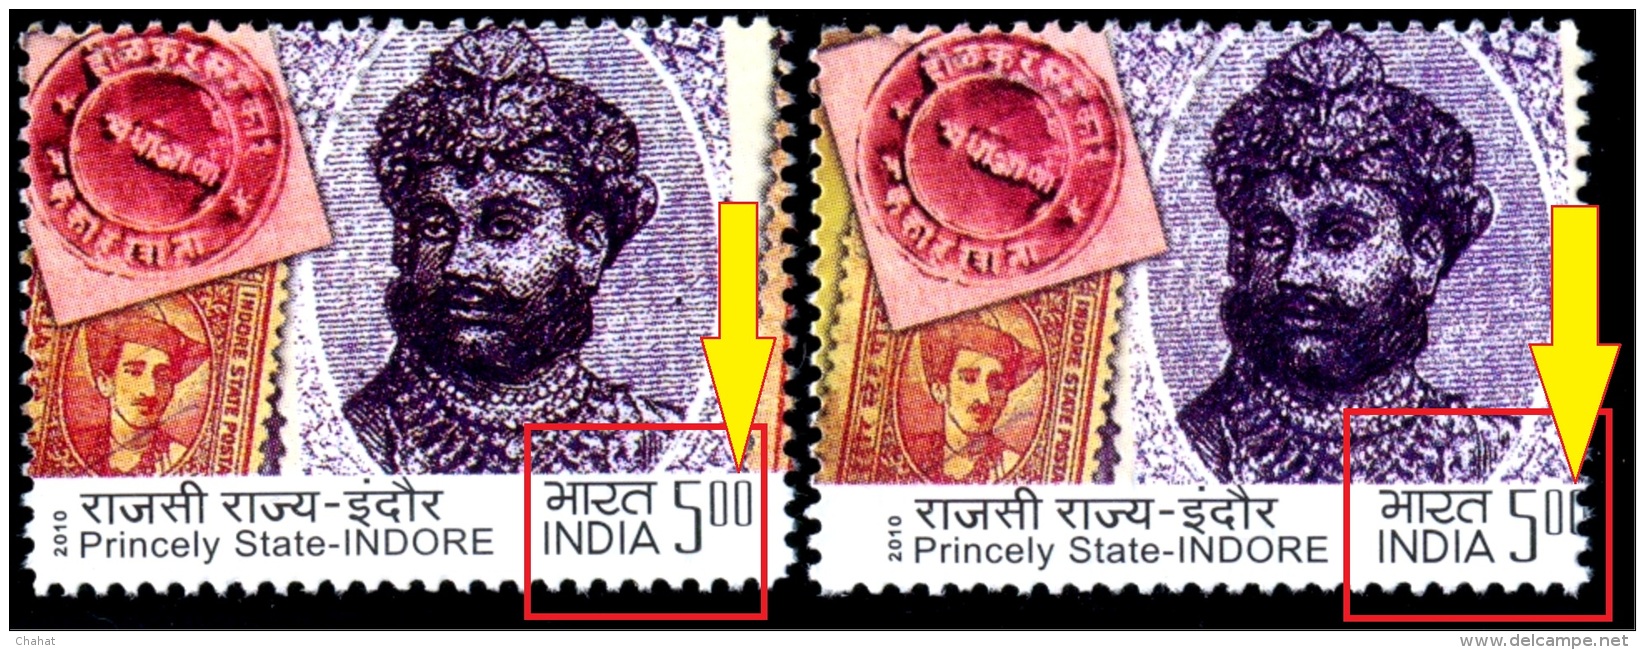 STAMPS ON STAMPS-PRINCELY STATES OF INDIA-INDORE STATE-MASSIVE ERROR-MNH-B9-806 - Plaatfouten En Curiosa